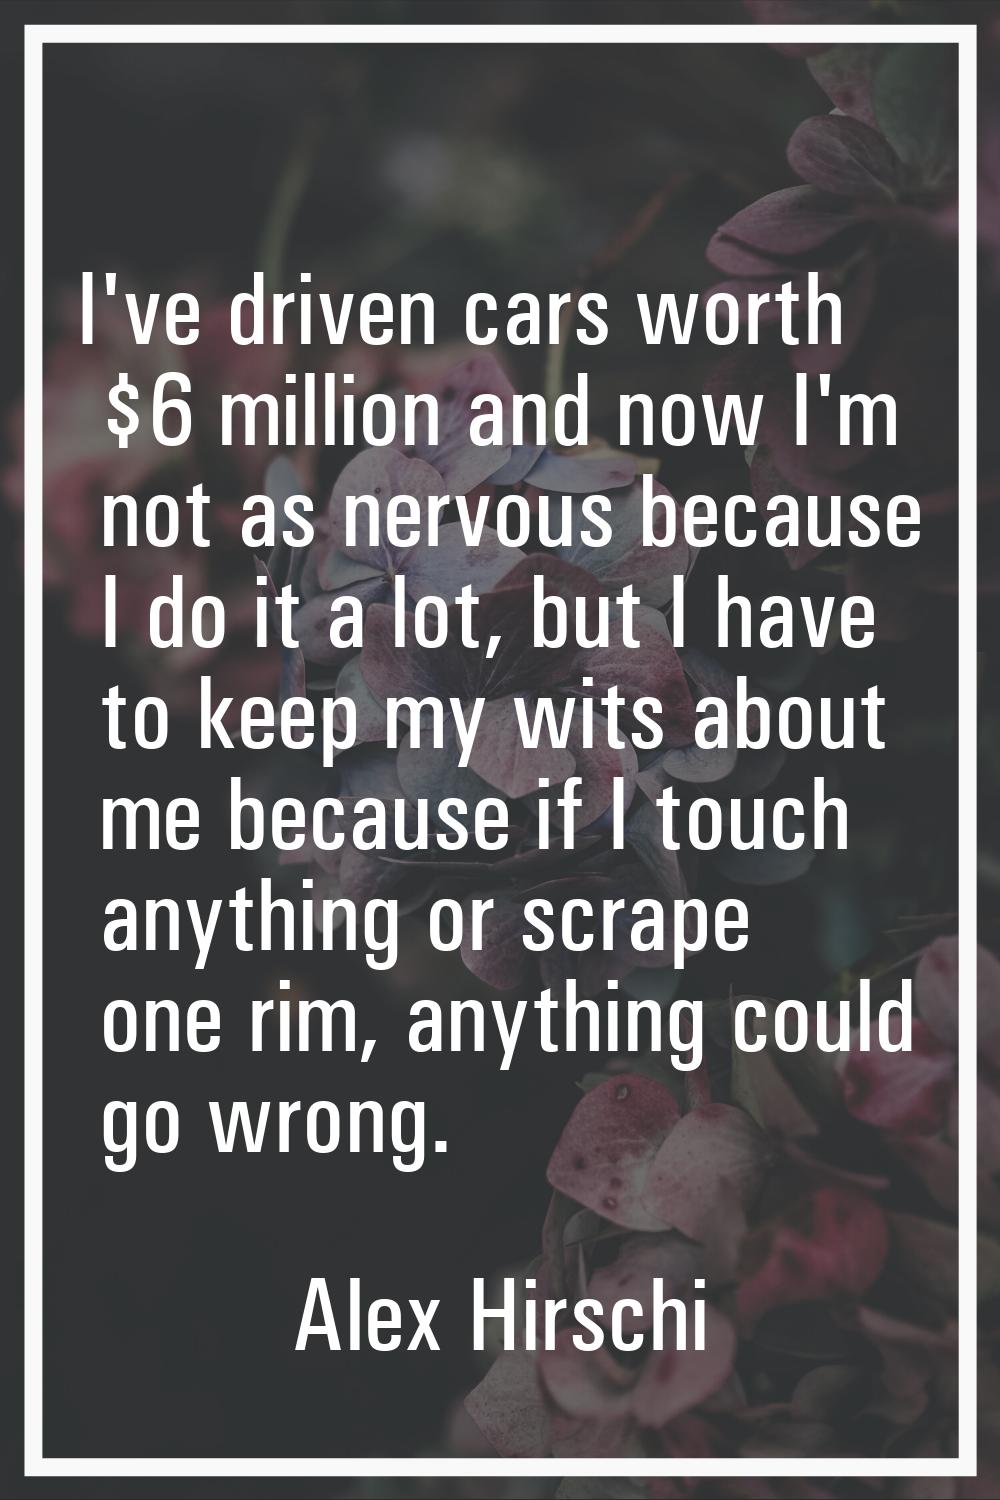 I've driven cars worth $6 million and now I'm not as nervous because I do it a lot, but I have to k